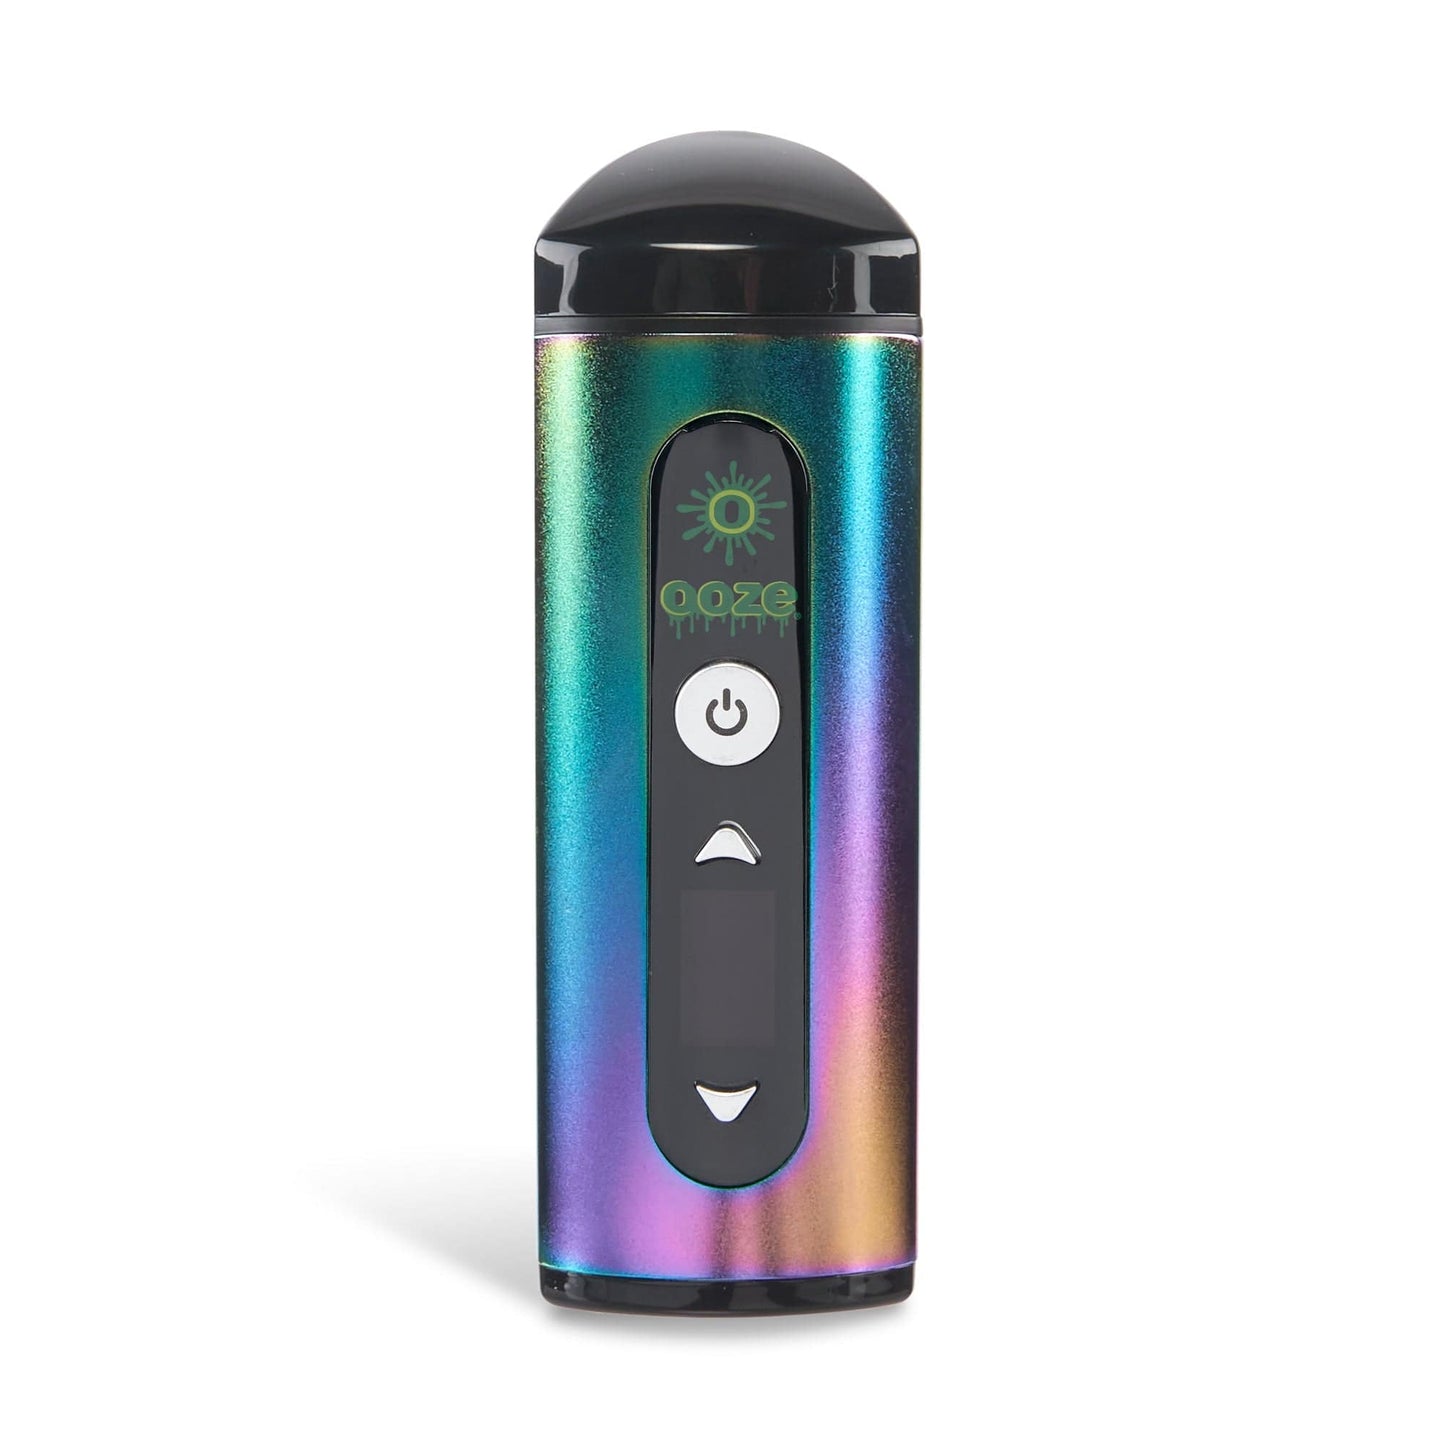 Ooze Batteries and Vapes Rainbow Ooze Drought Dry Herb Vaporizer Kit